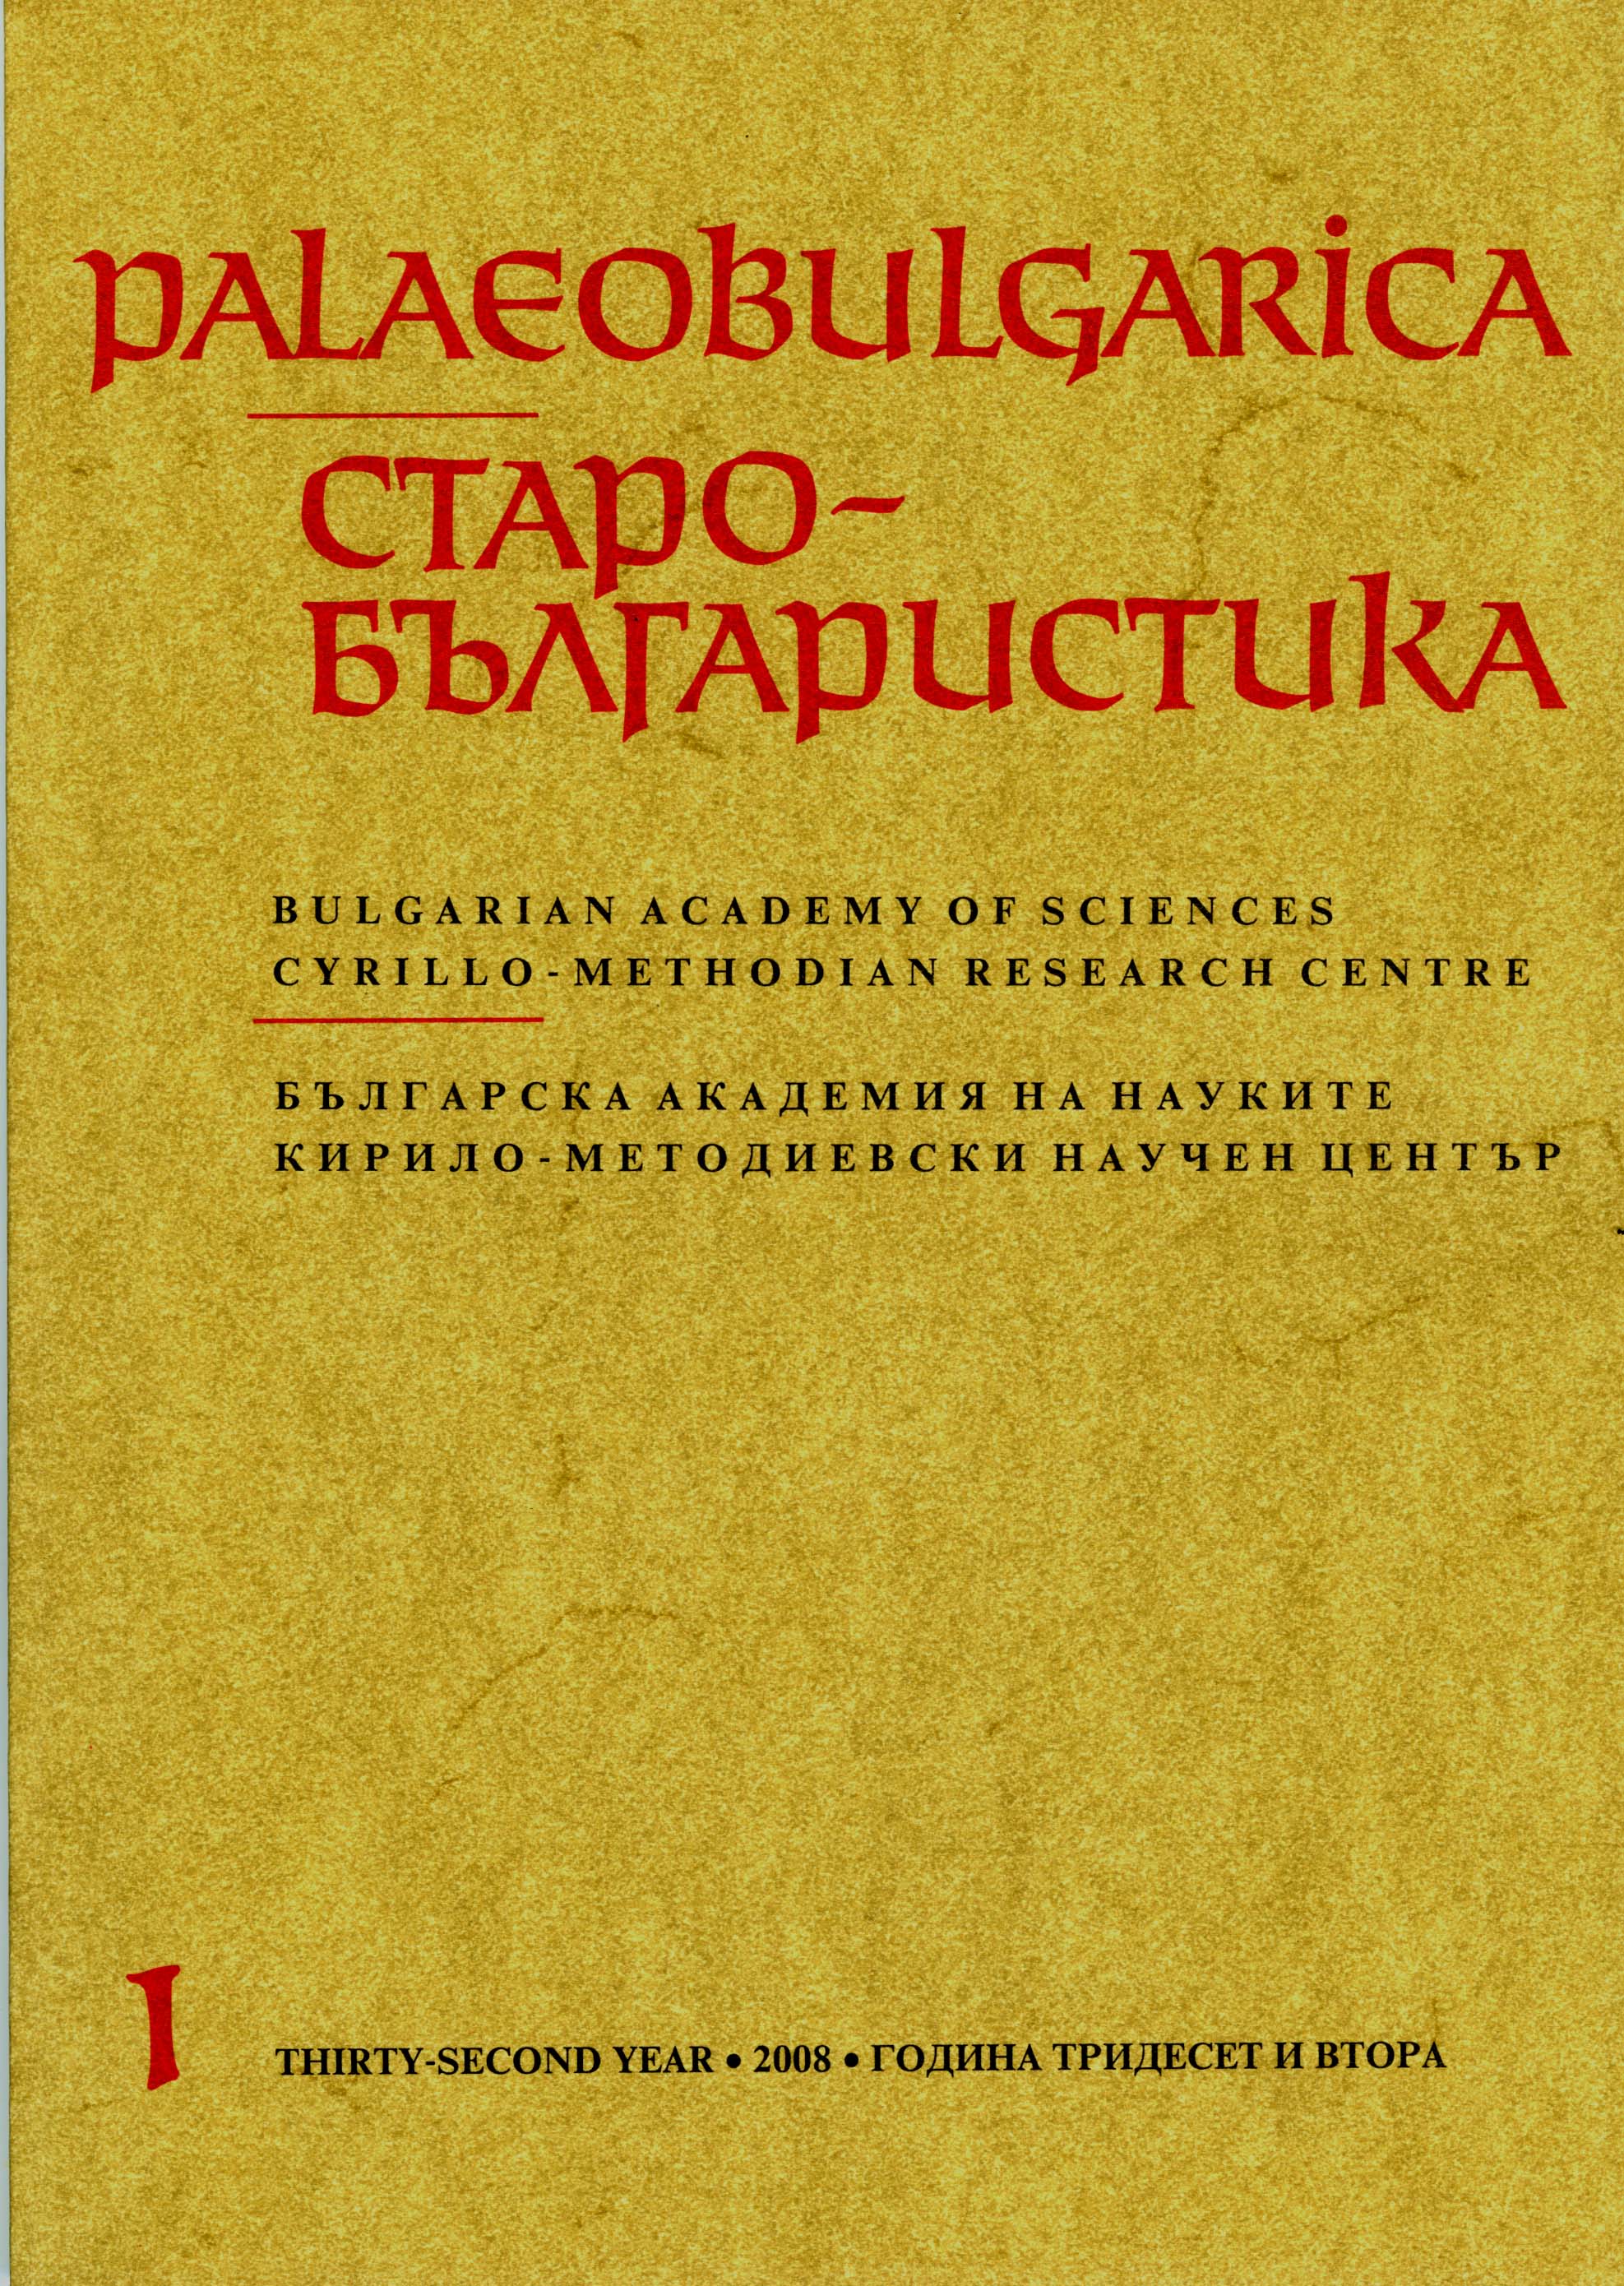 The Vita of St Cyril in the Editions from the Beginning of the 21st Century Cover Image